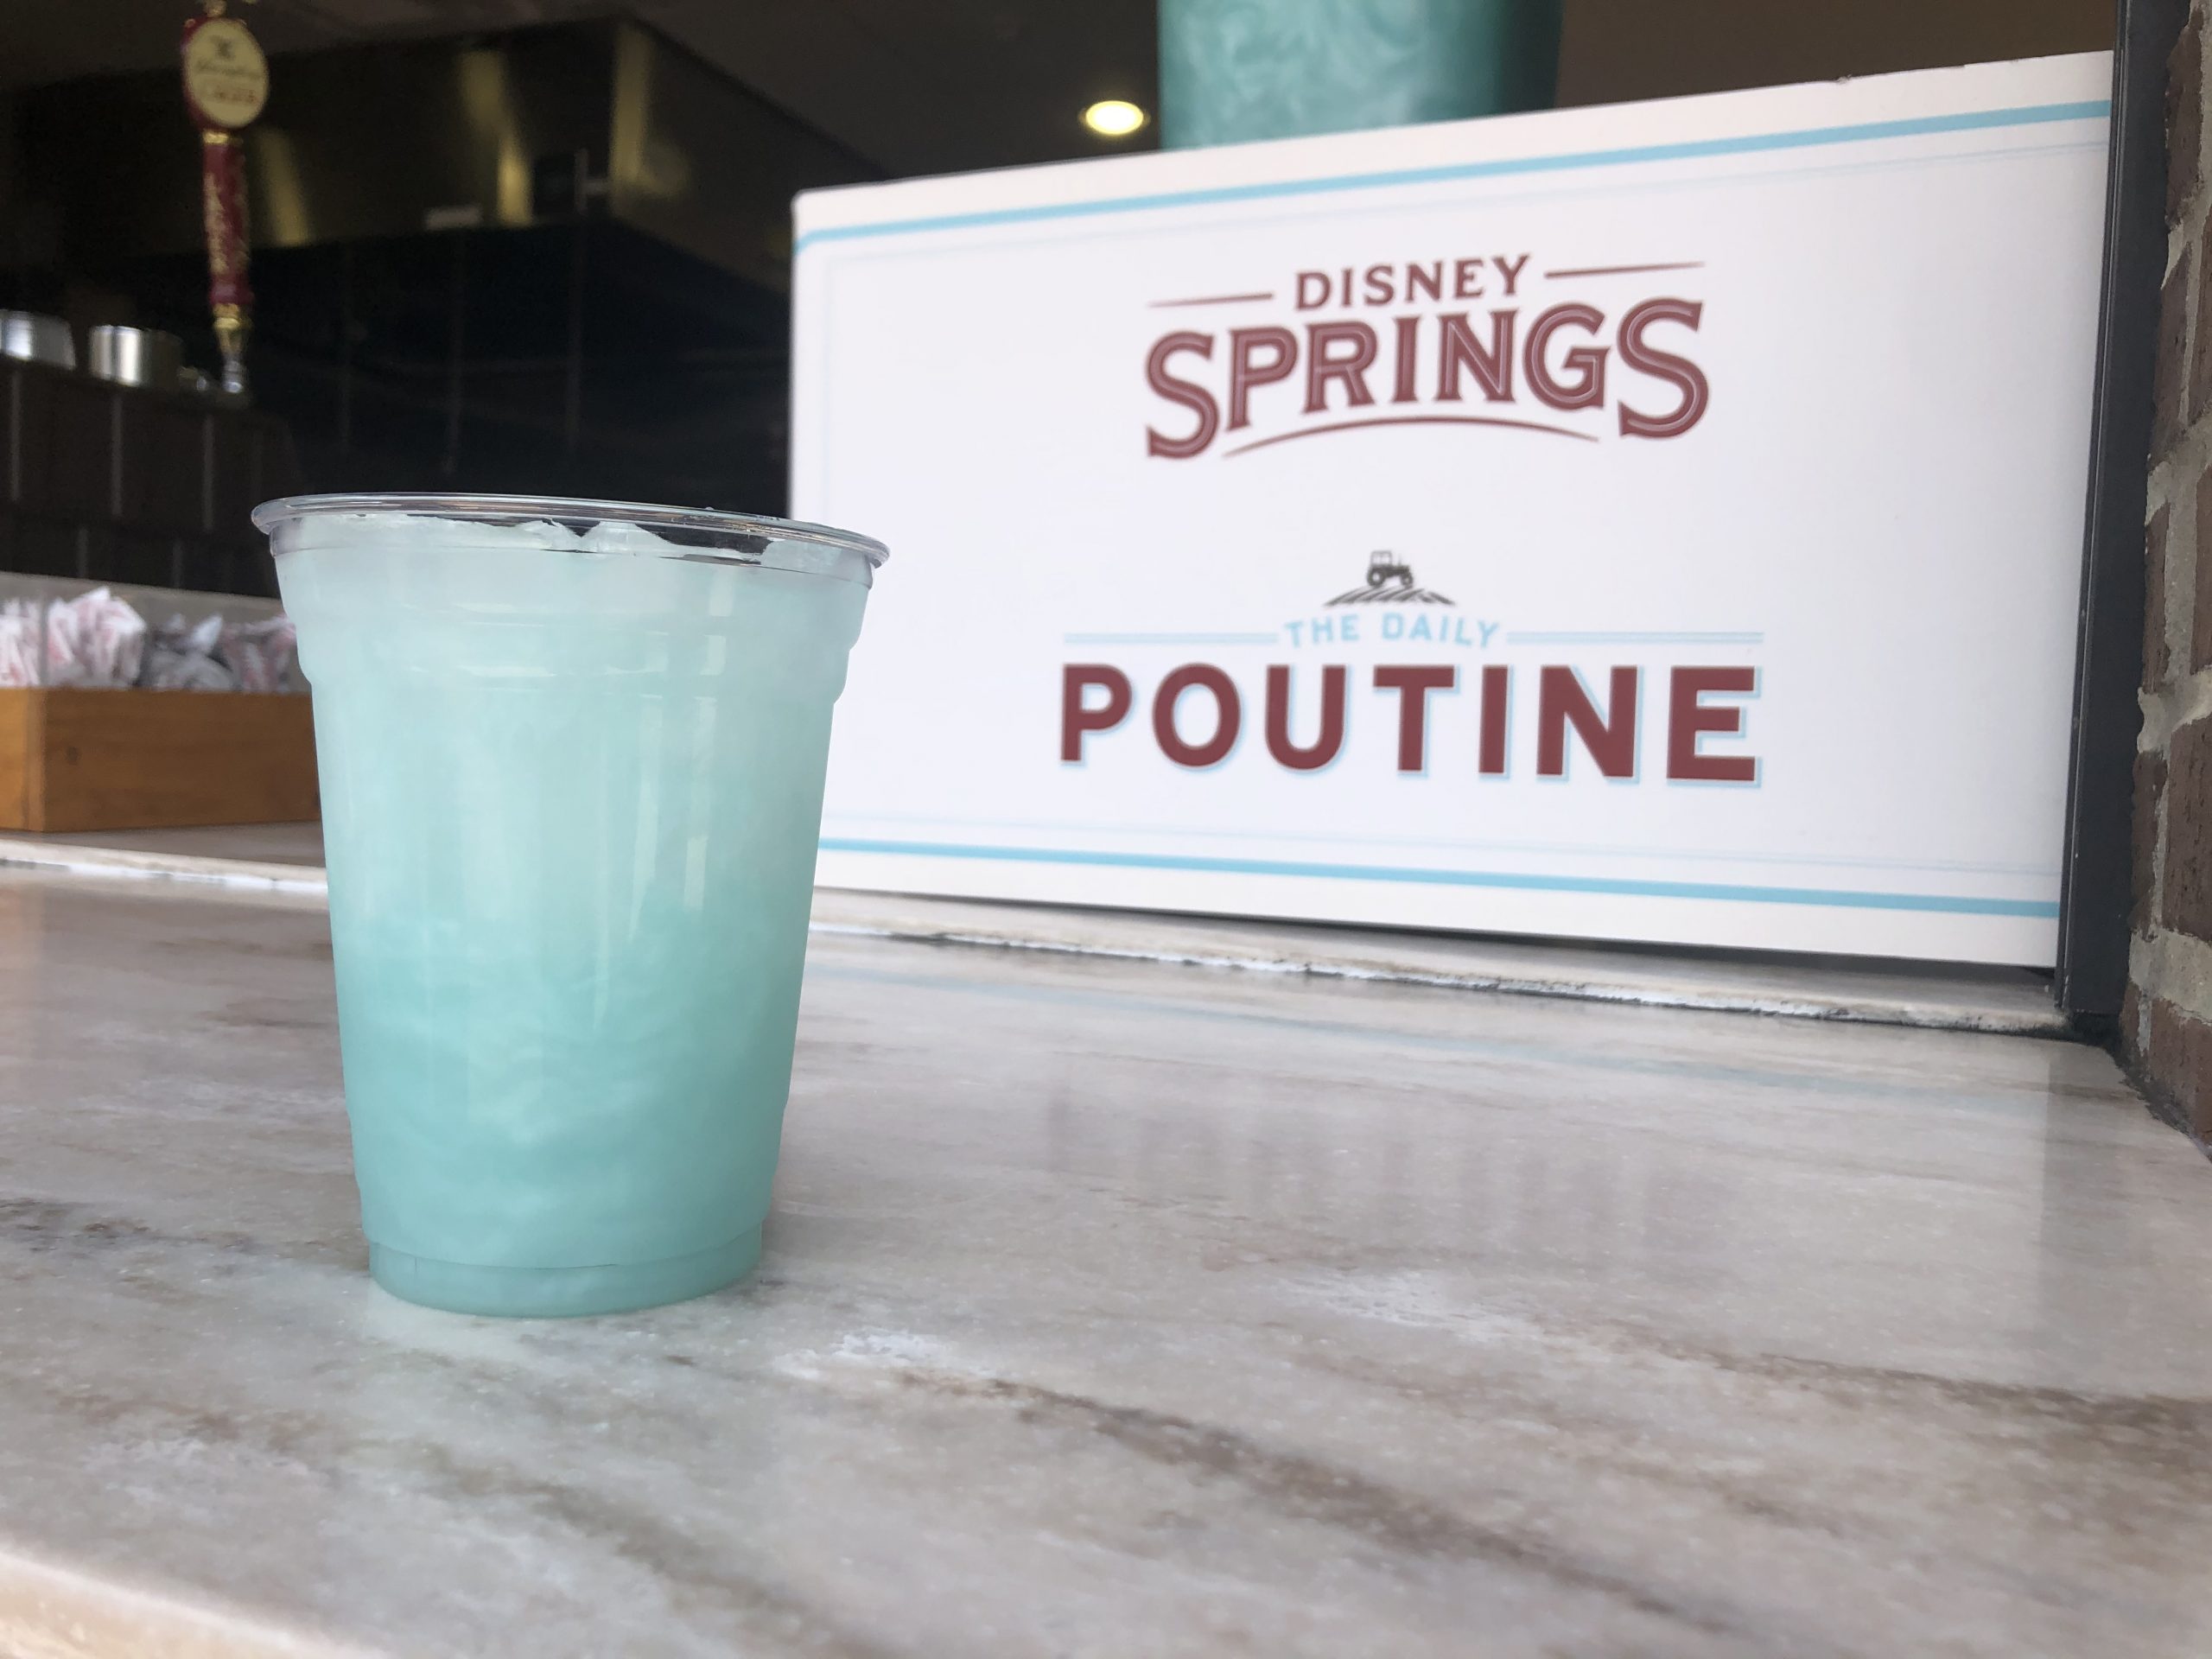 Arendelle Aqua Punch is a Summer Treat at Disney Springs